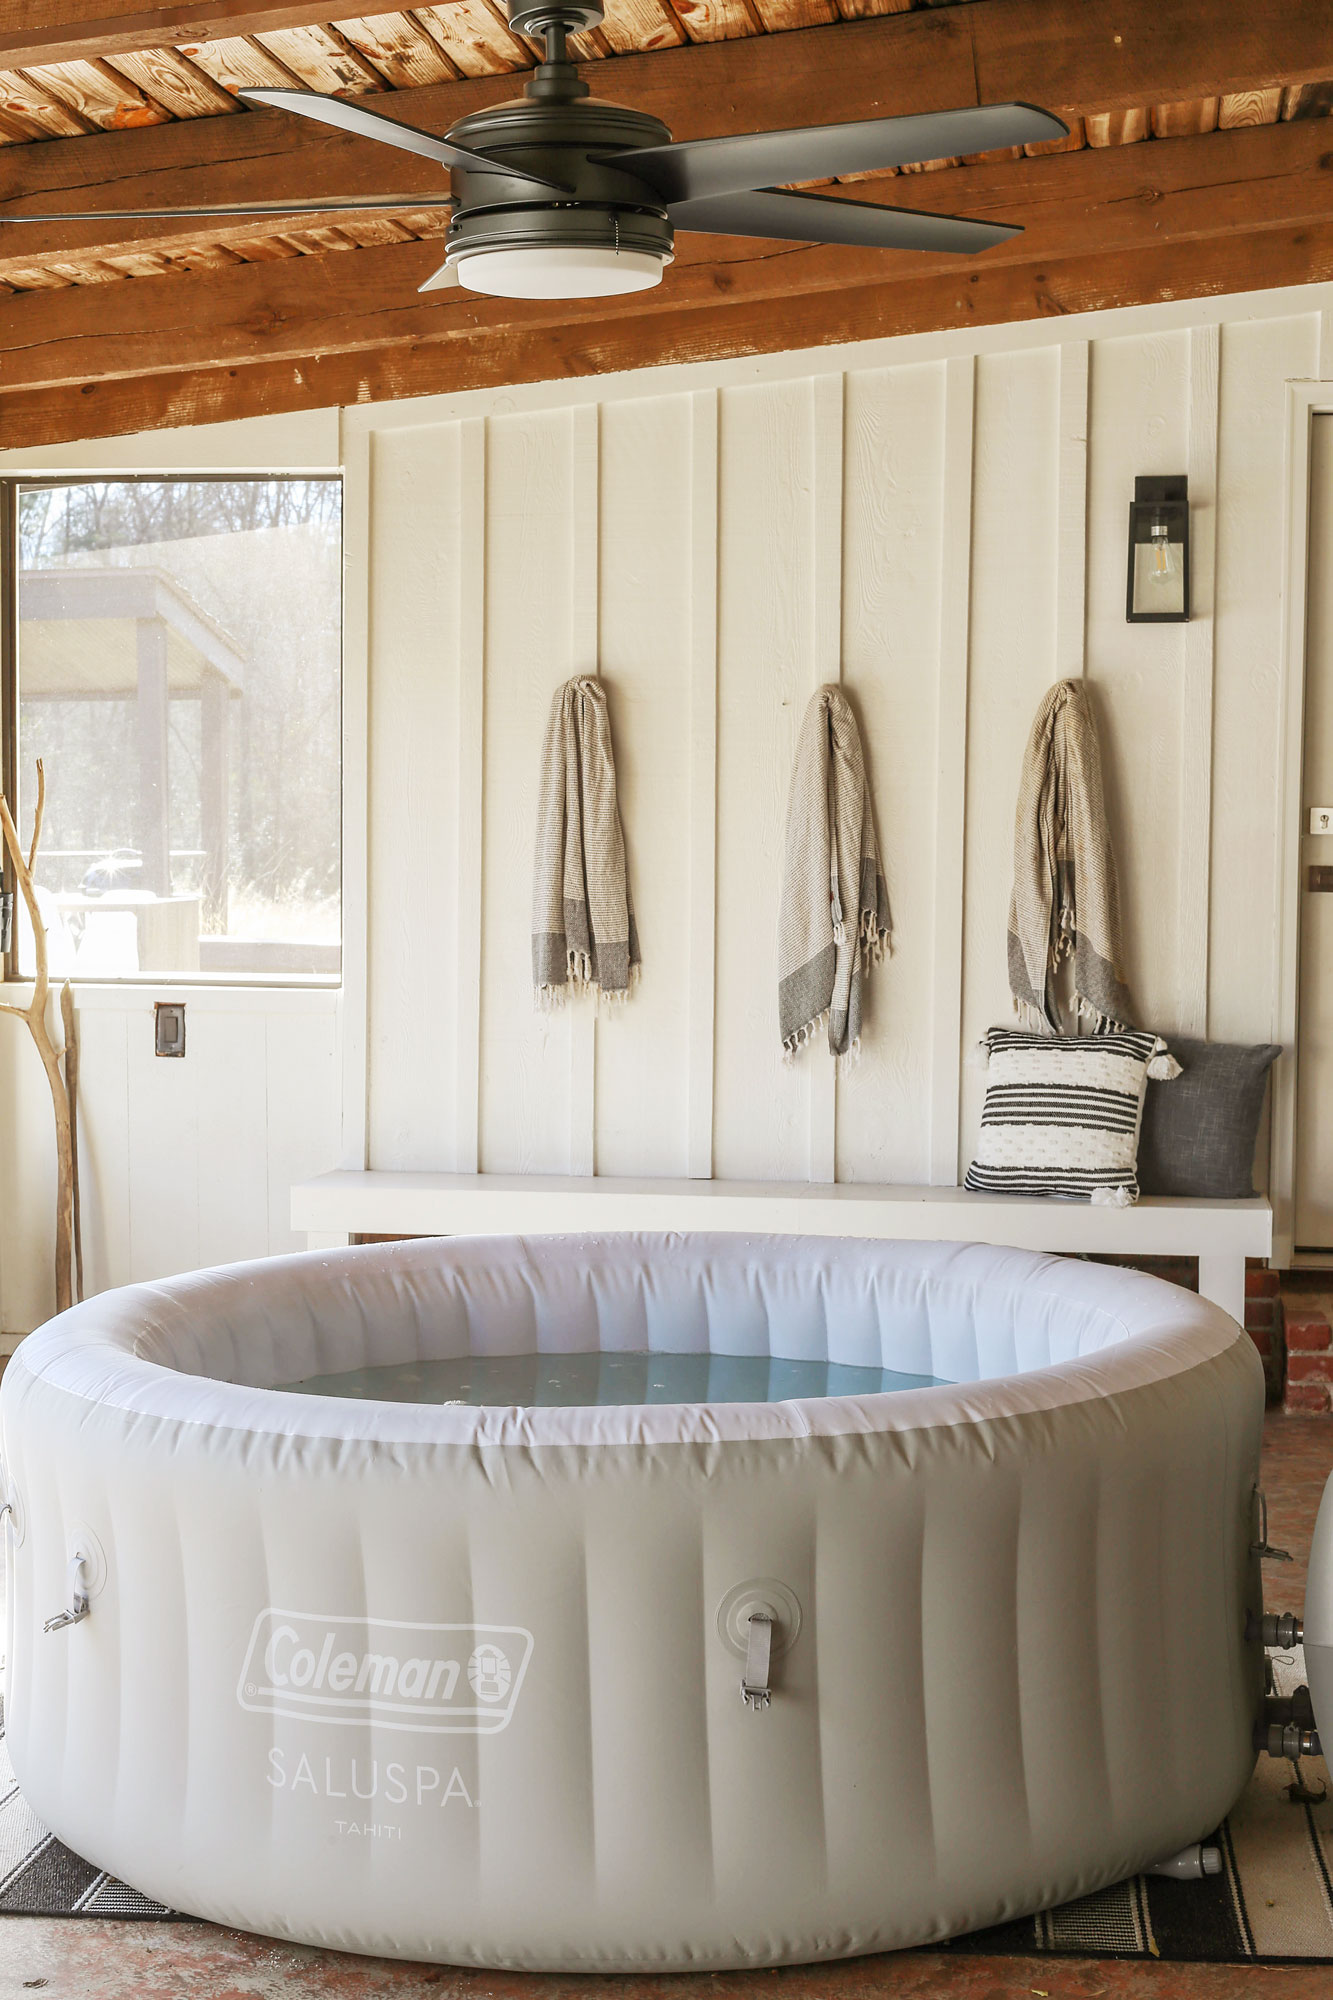 The Best Inflatable Hot Tub for Cold Weather: Review